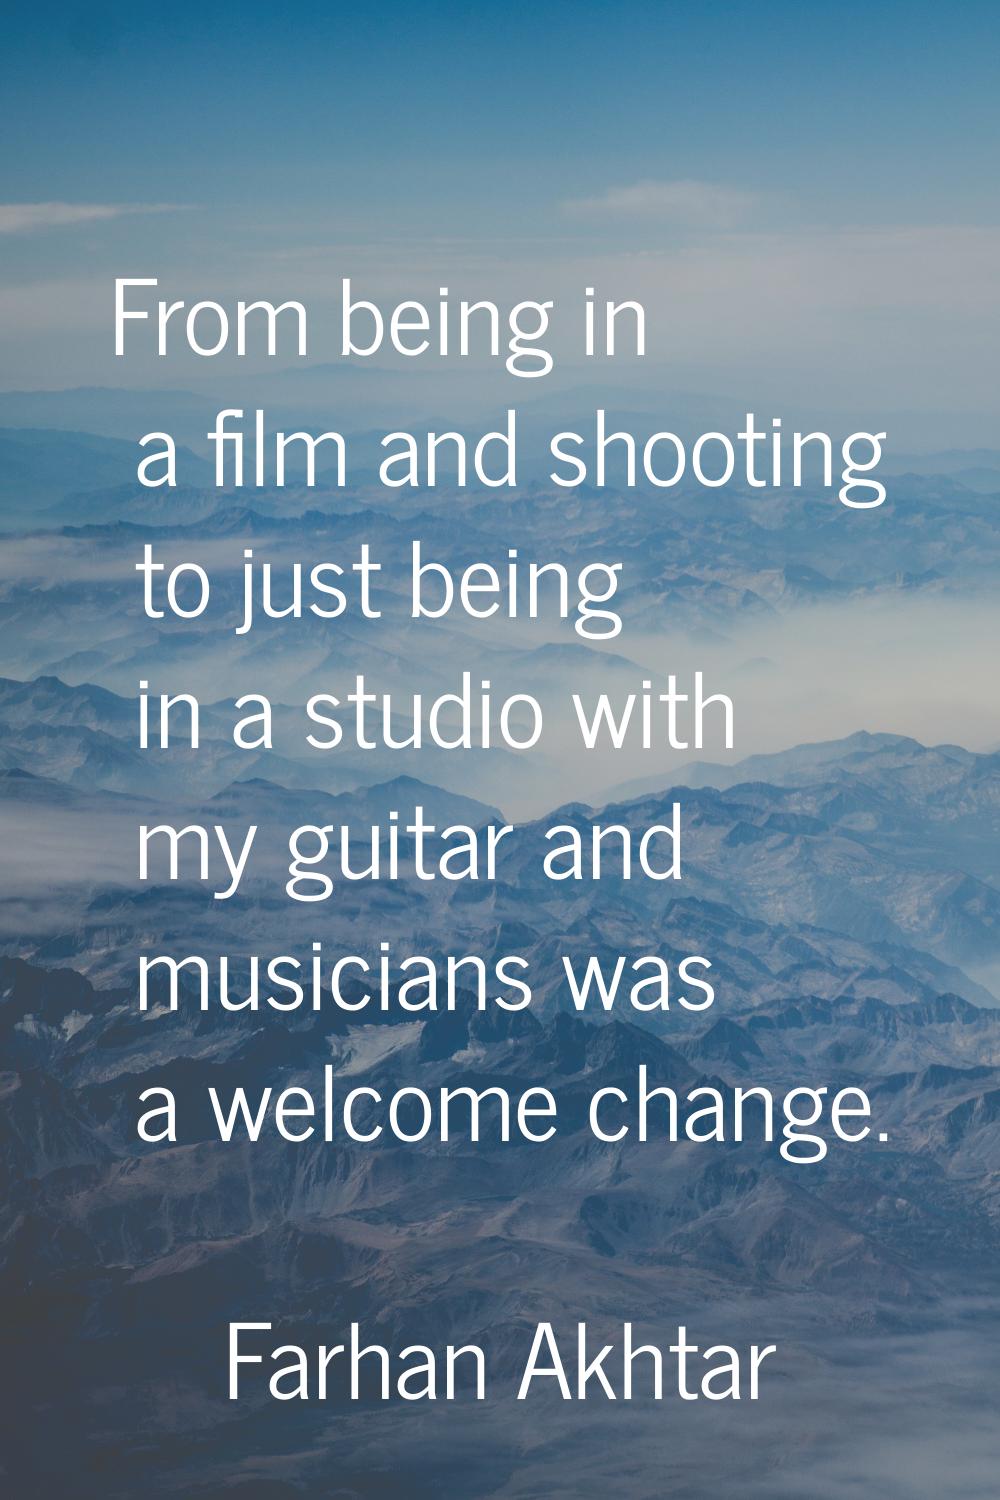 From being in a film and shooting to just being in a studio with my guitar and musicians was a welc